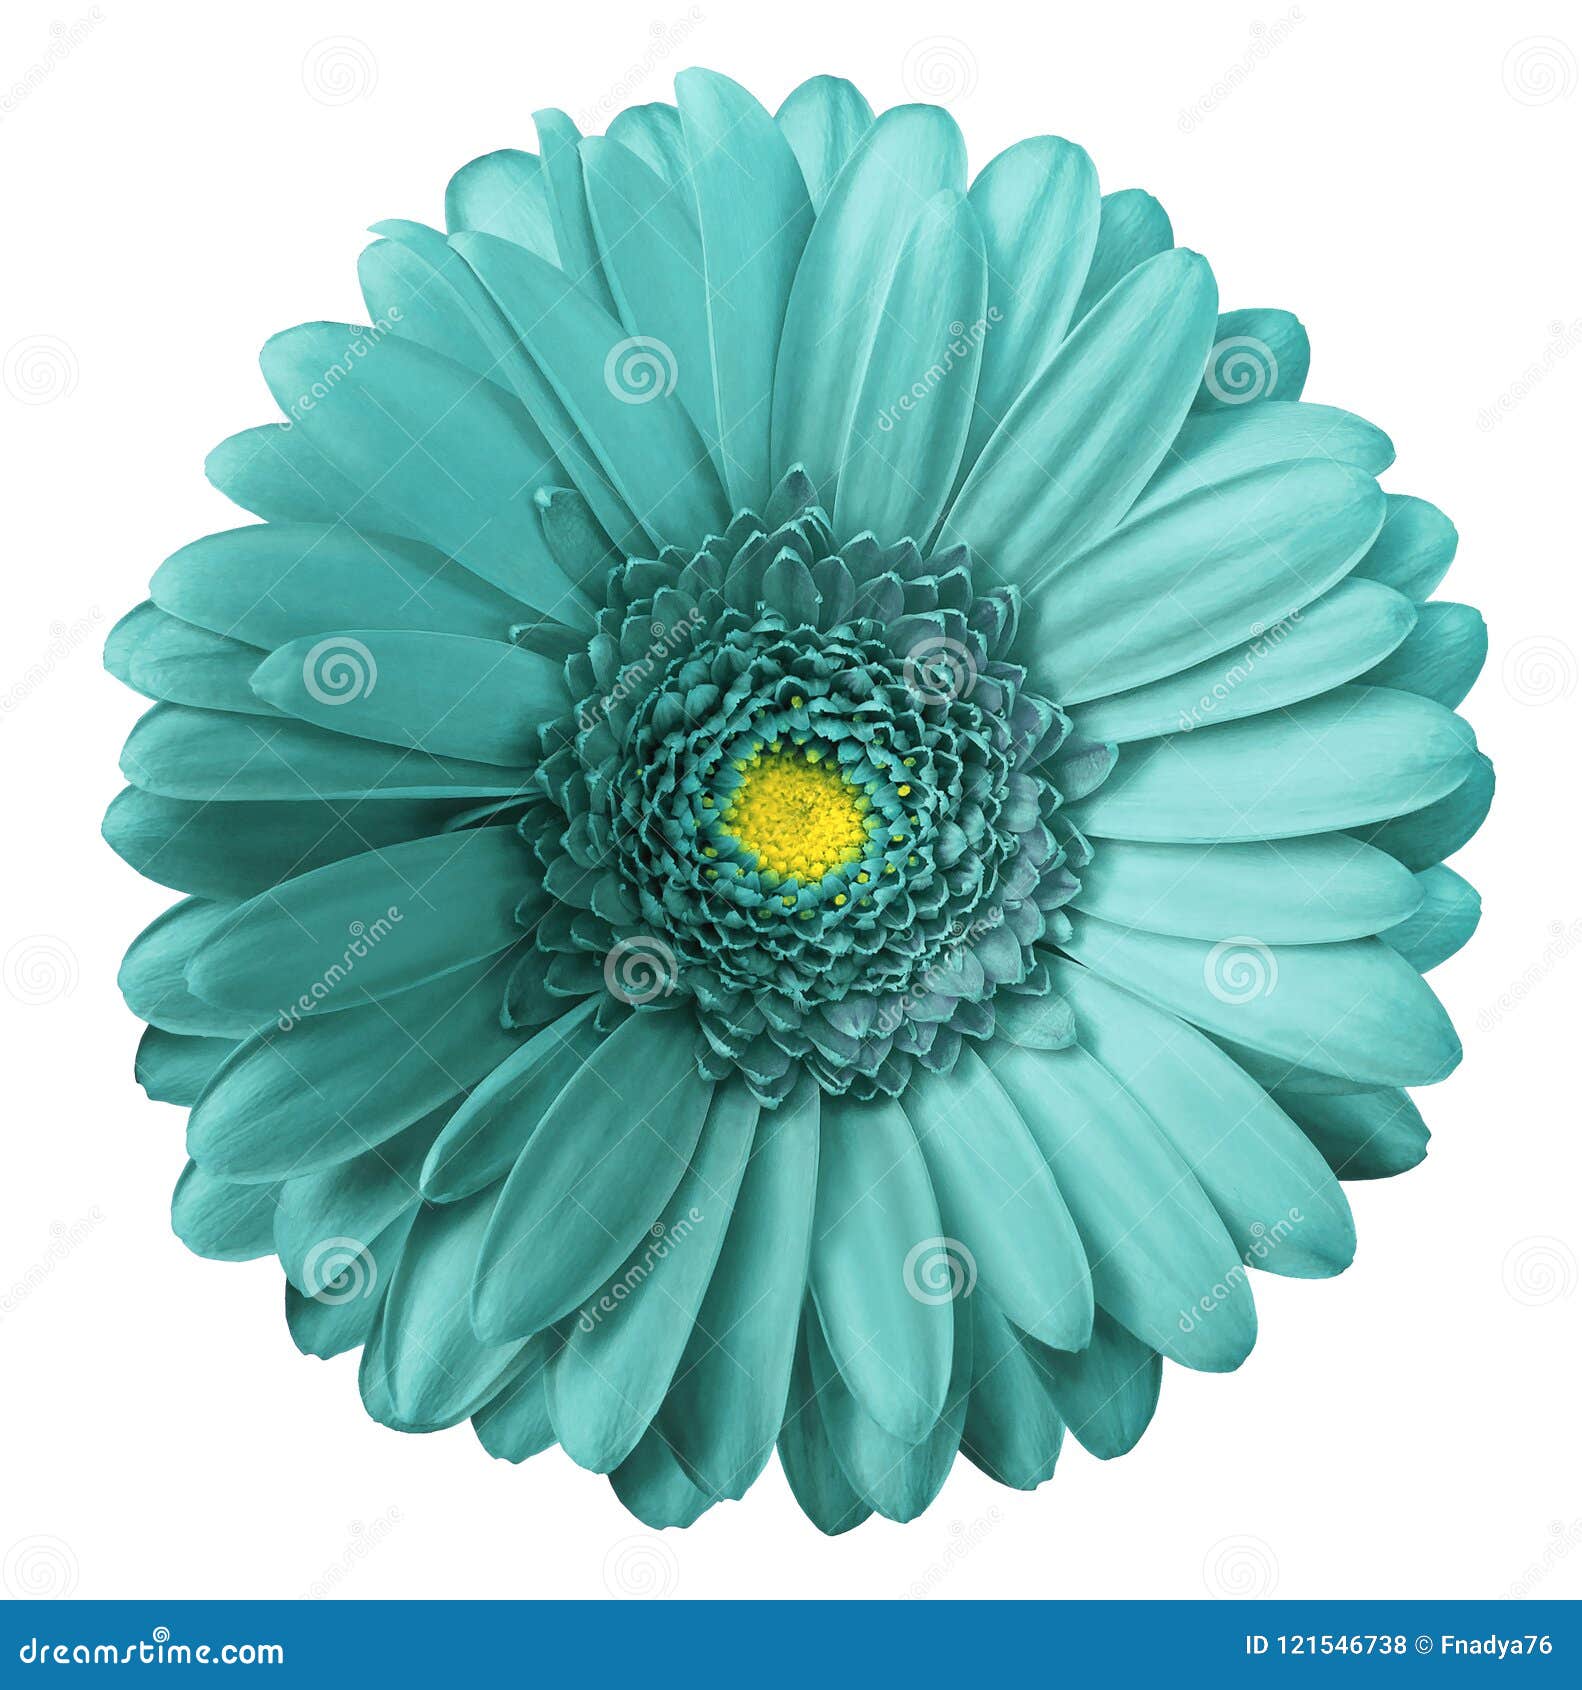 gerbera turquoise flower on white  background with clipping path. no shadows. closeup.